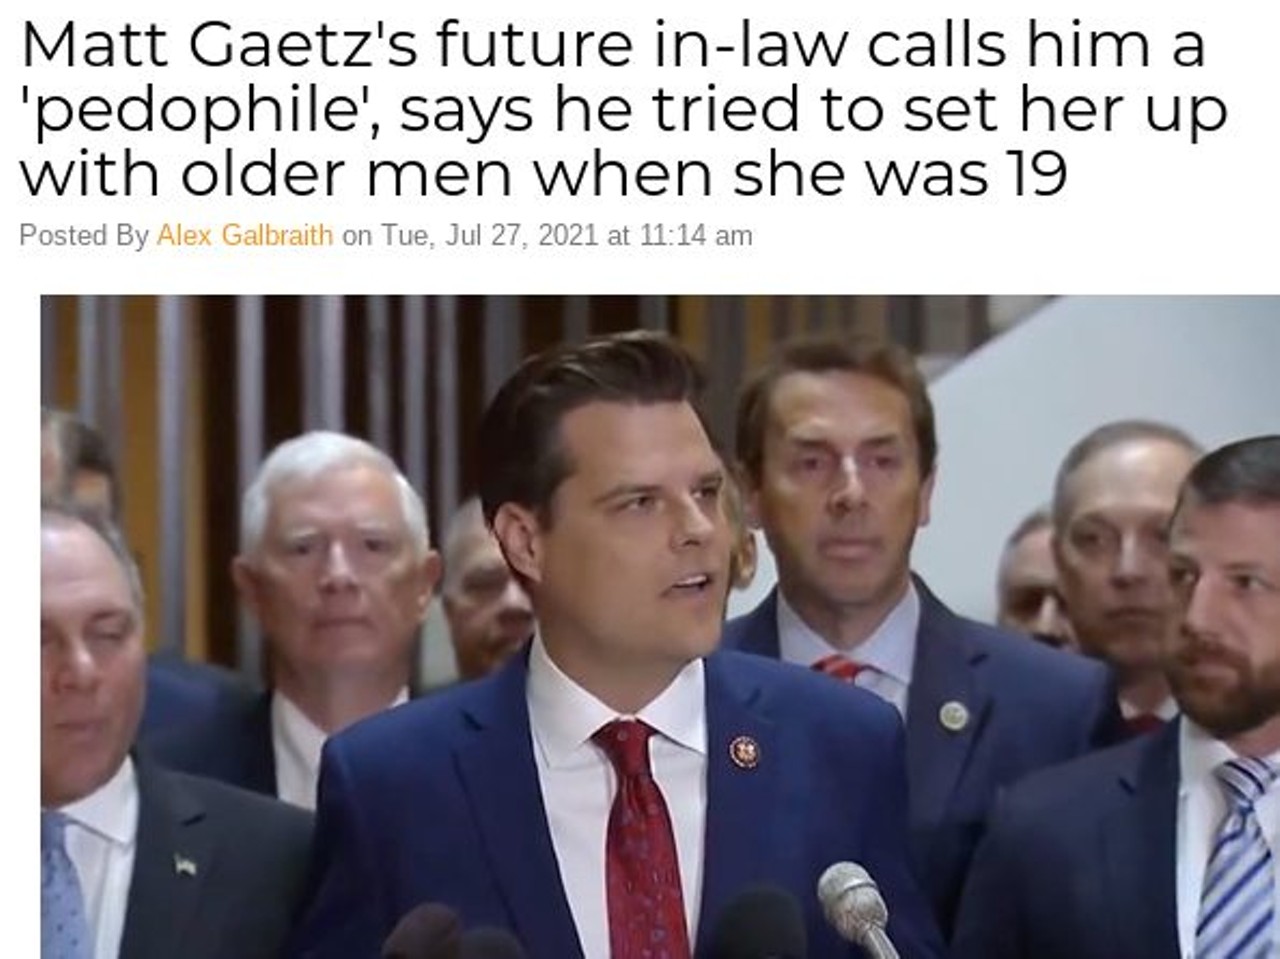 Matt Gaetz's future in-law calls him a 'pedophile', says he tried to set her up with older men when she was 19
